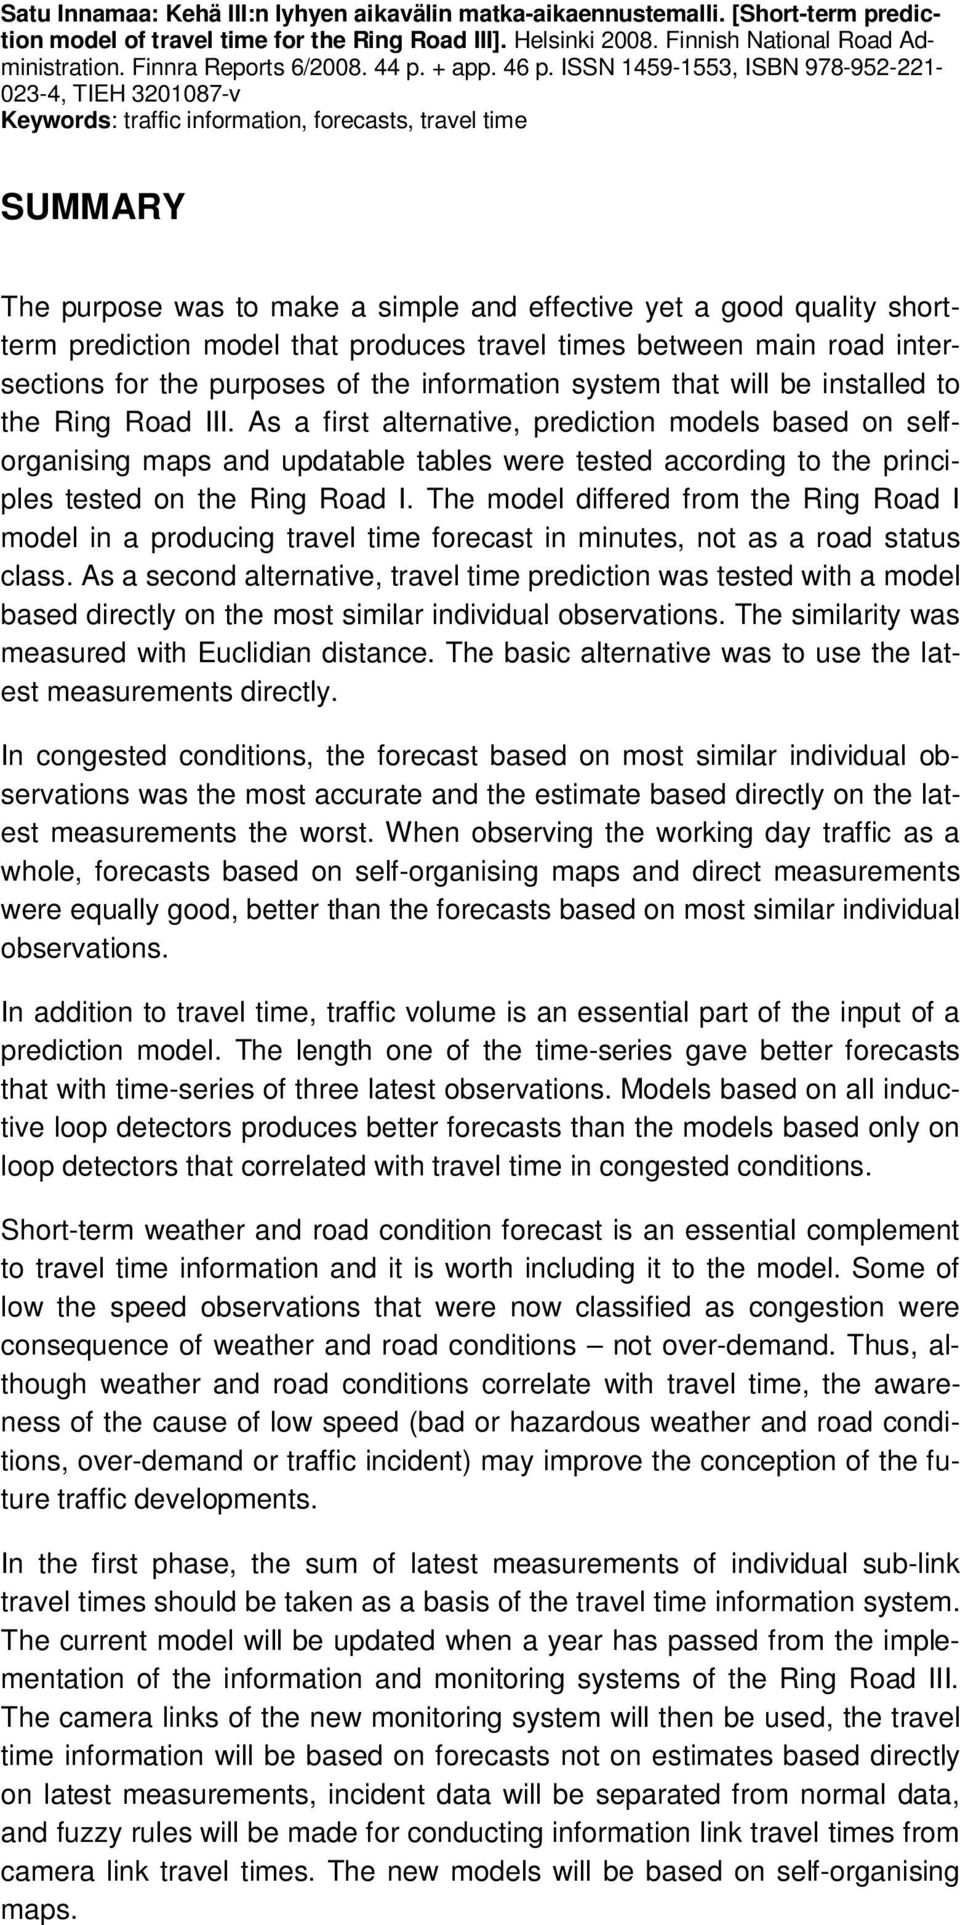 ISSN 1459-1553, ISBN 978-952-221-023-4, TIEH 3201087-v Keywords: traffic information, forecasts, travel time SUMMARY The purpose was to make a simple and effective yet a good quality shortterm